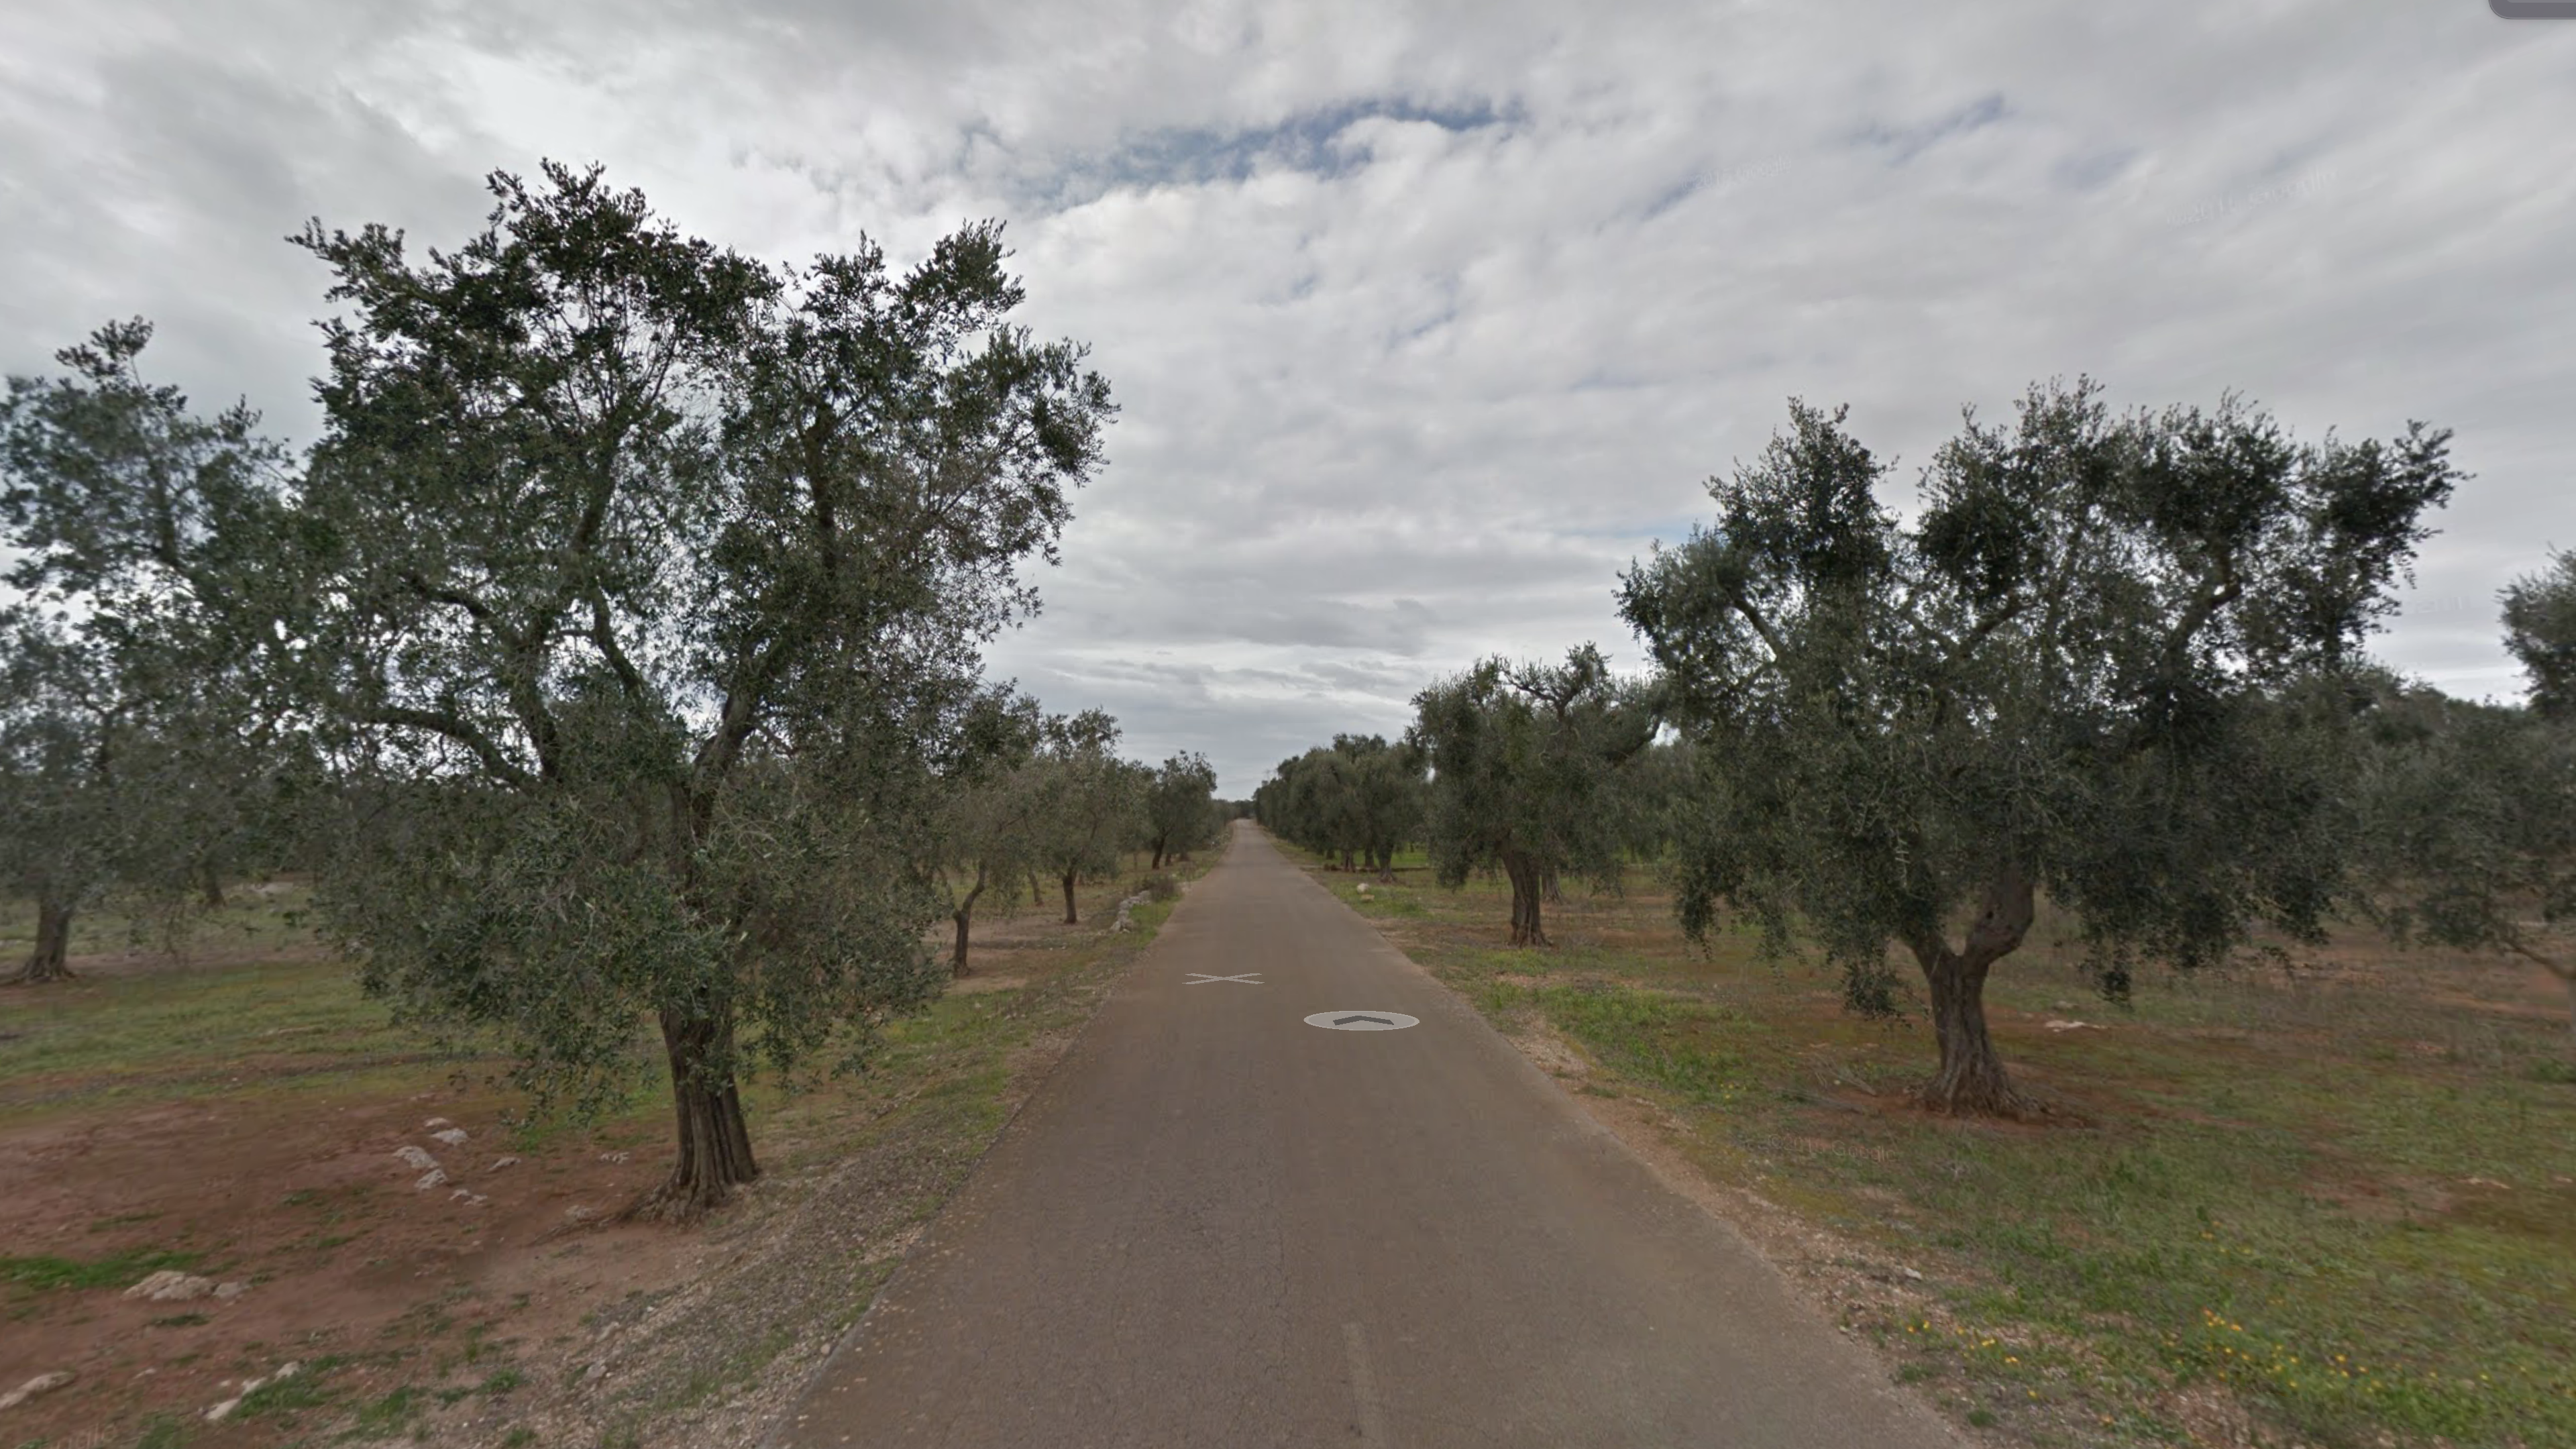 ITINERARY OF THE VILLAGES AMONG OLIVE GROVES AND VINEYARDS